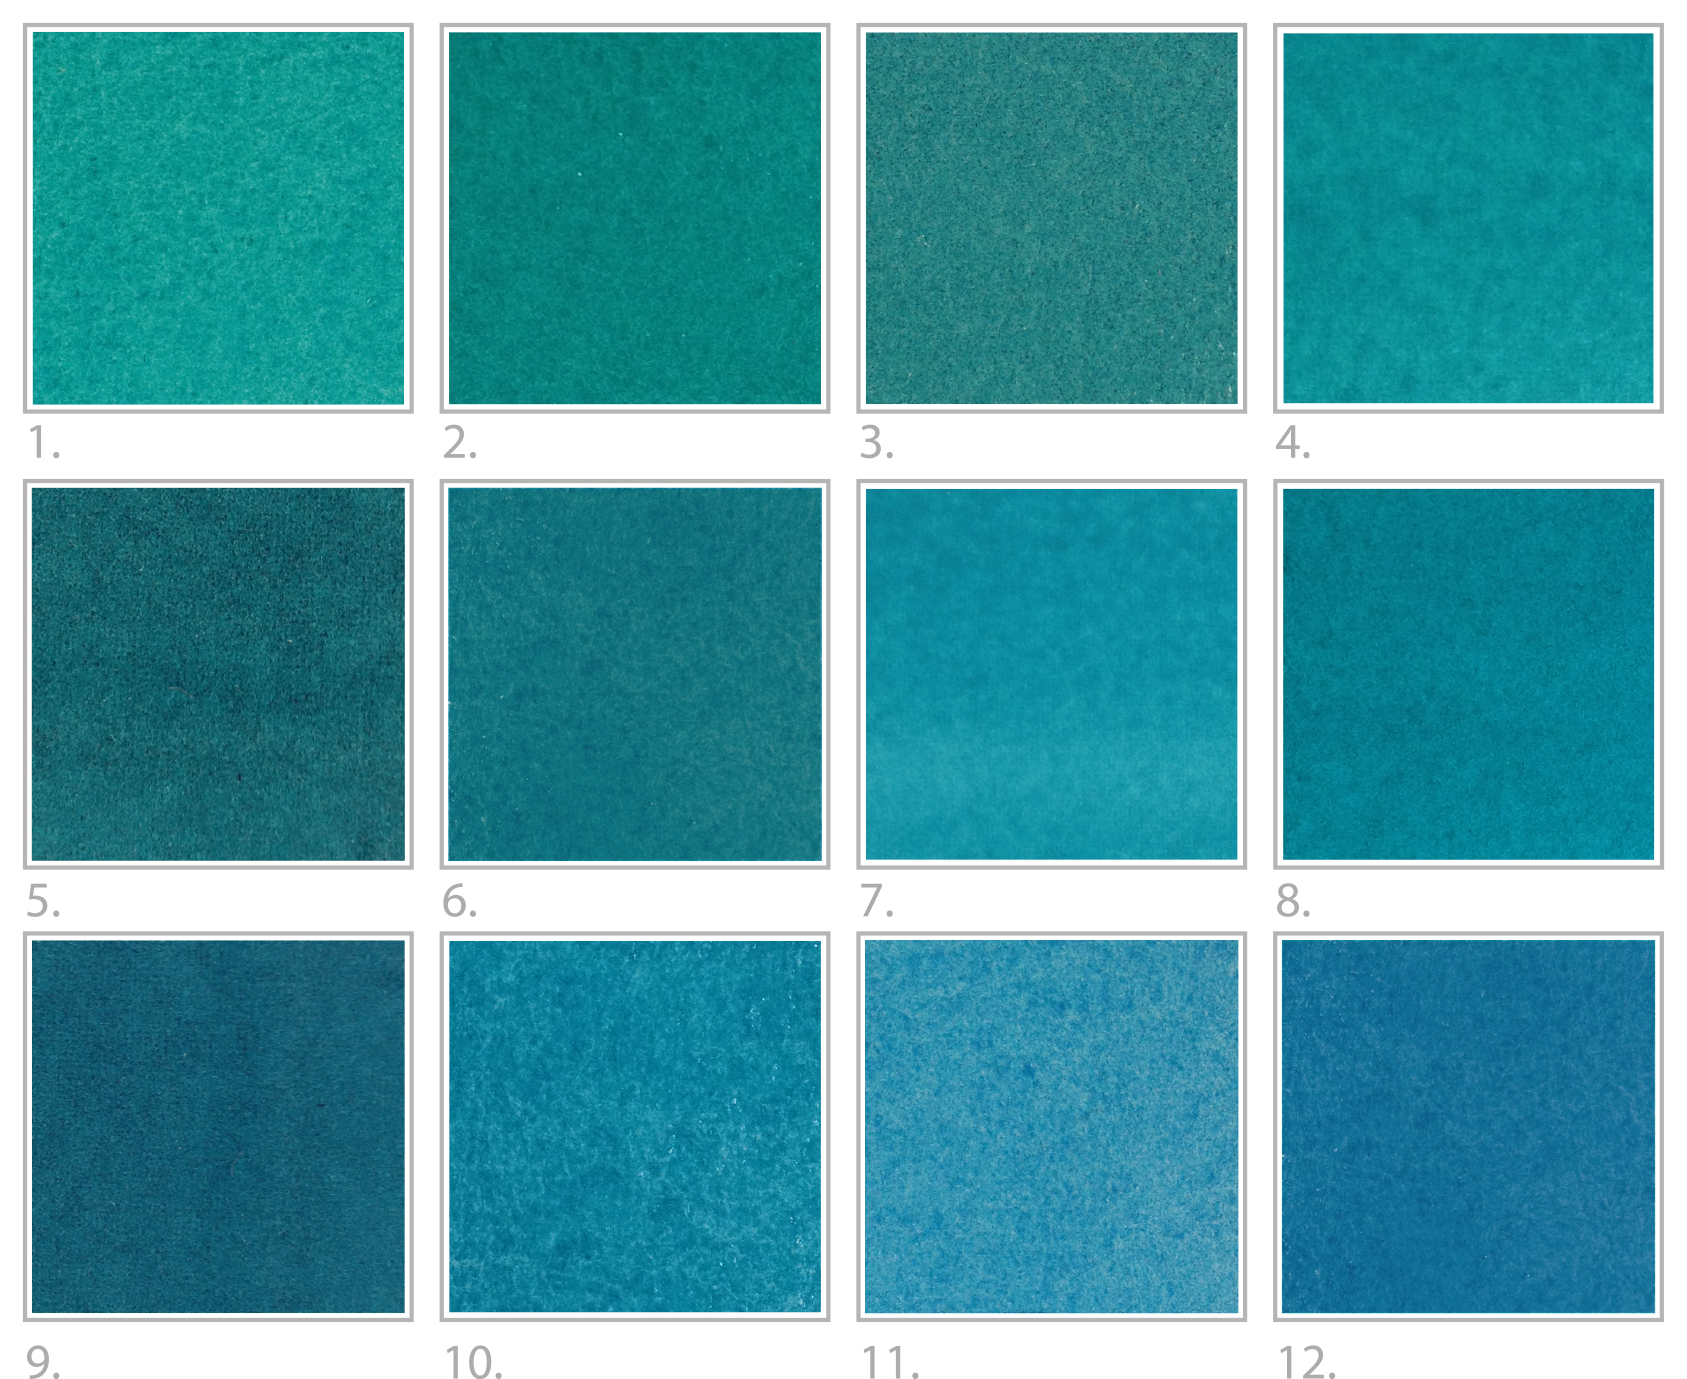 http://cdn.shopify.com/s/files/1/0289/5961/files/turquoise_washes_for_blog_outlines.png?2938